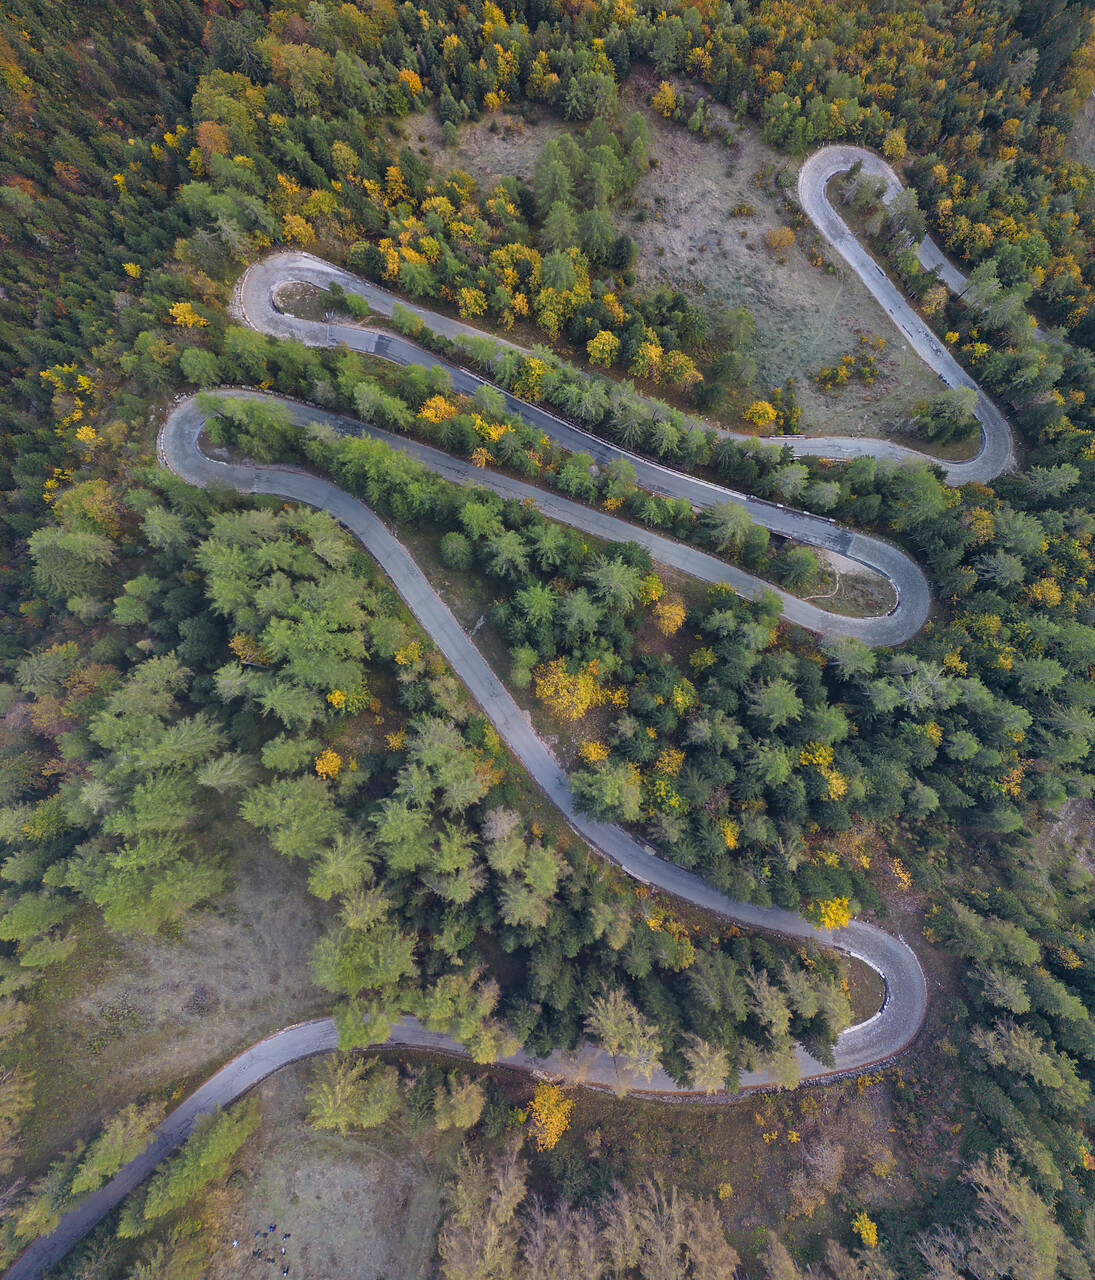 #230344-1 - Aerial View of Road Winding Through Forest, Julian Alps, Slovenia, Europe